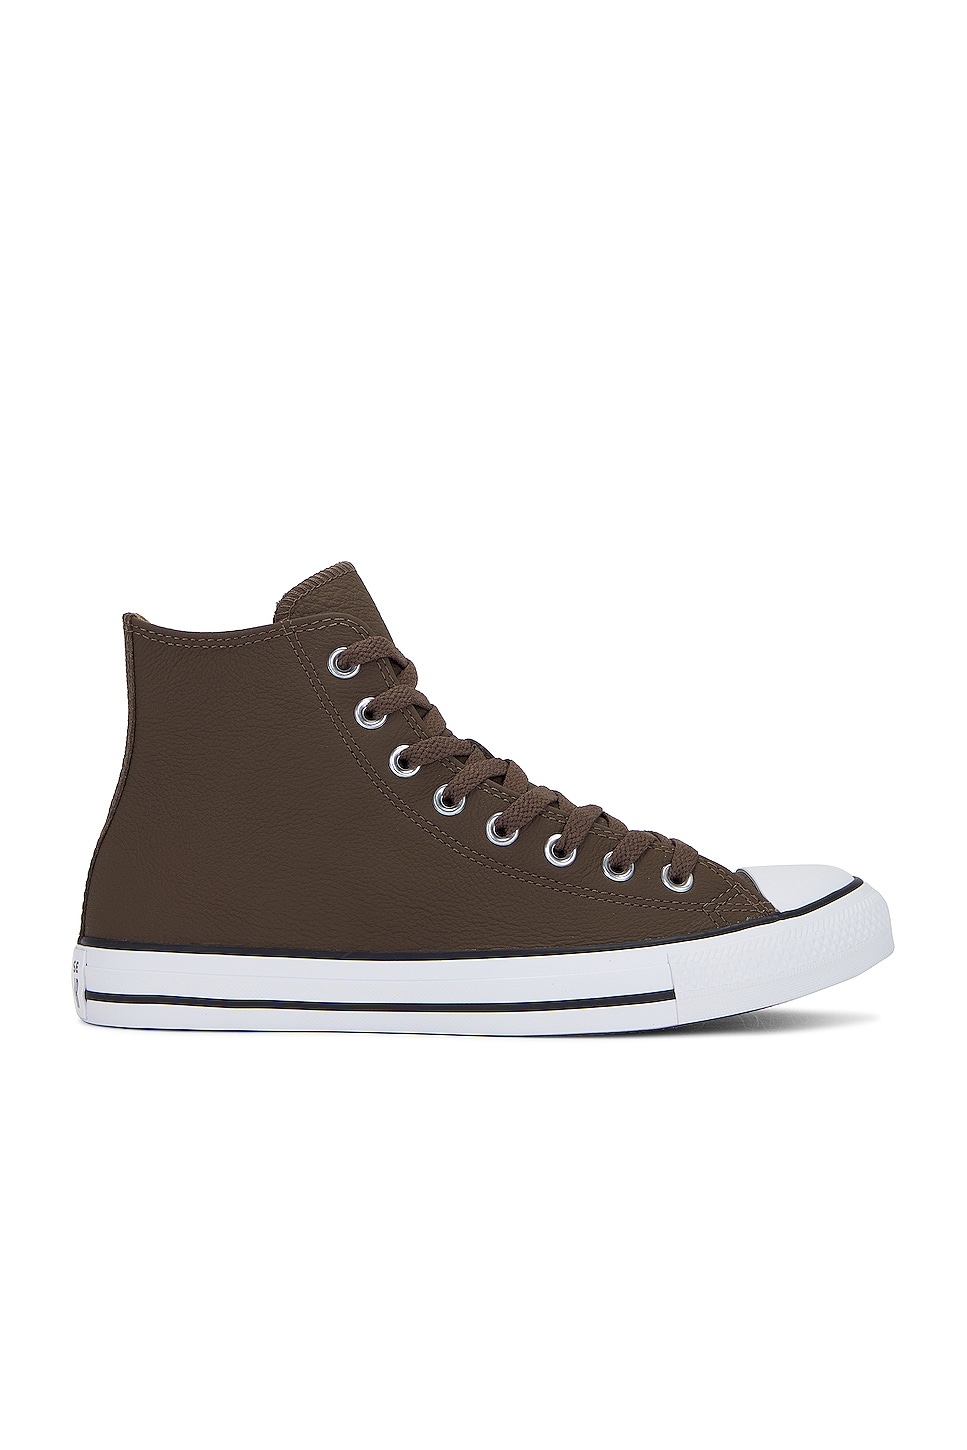 Image 1 of Converse Chuck Taylor All Star Seasonal Color Leather Hi Tops in Engine Smoke, Squirmy Worm, White